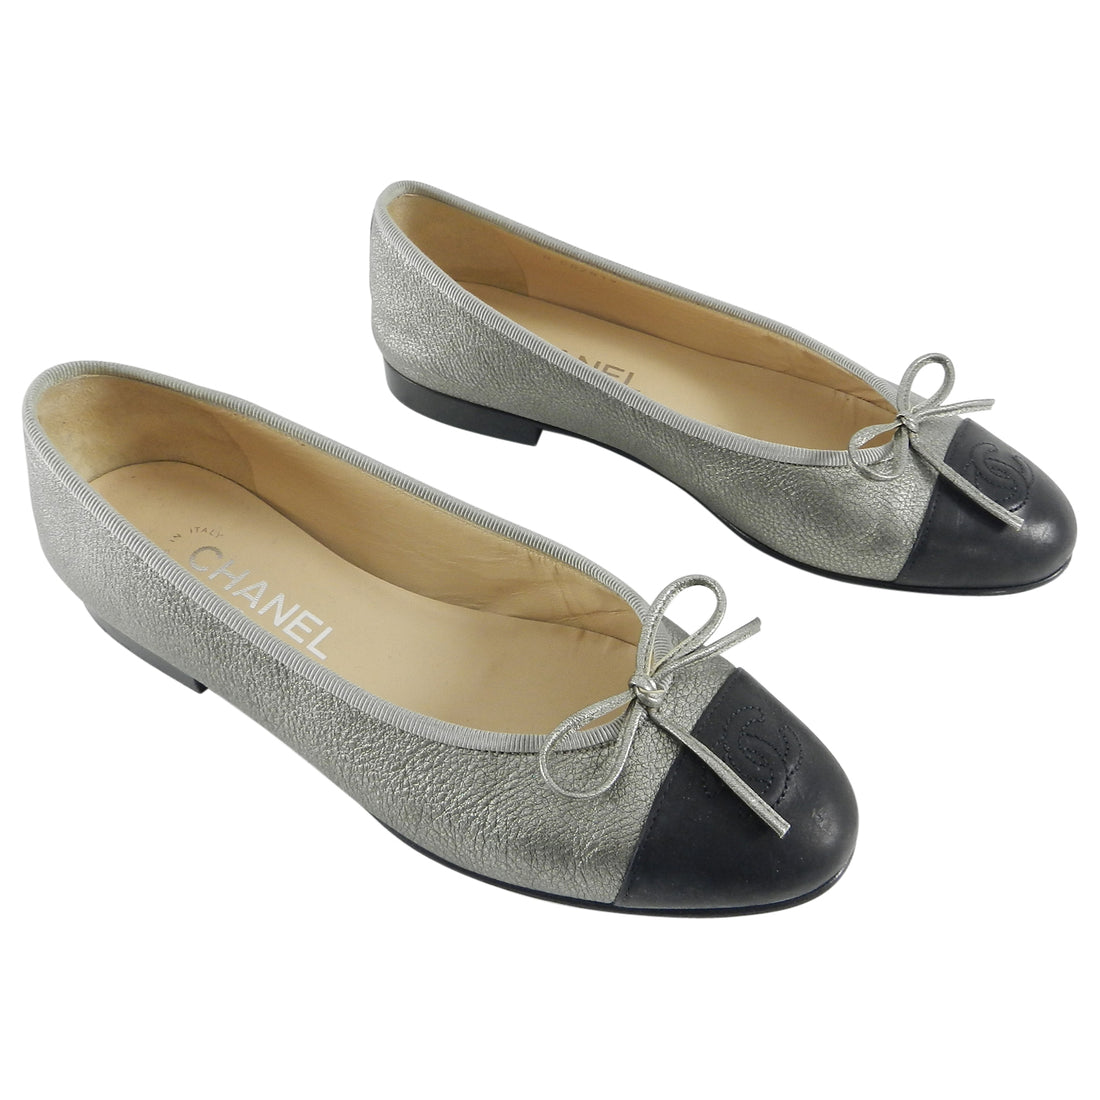 Chanel Champagne & Pastel Tweed Ballet Flats – Dina C's Fab and